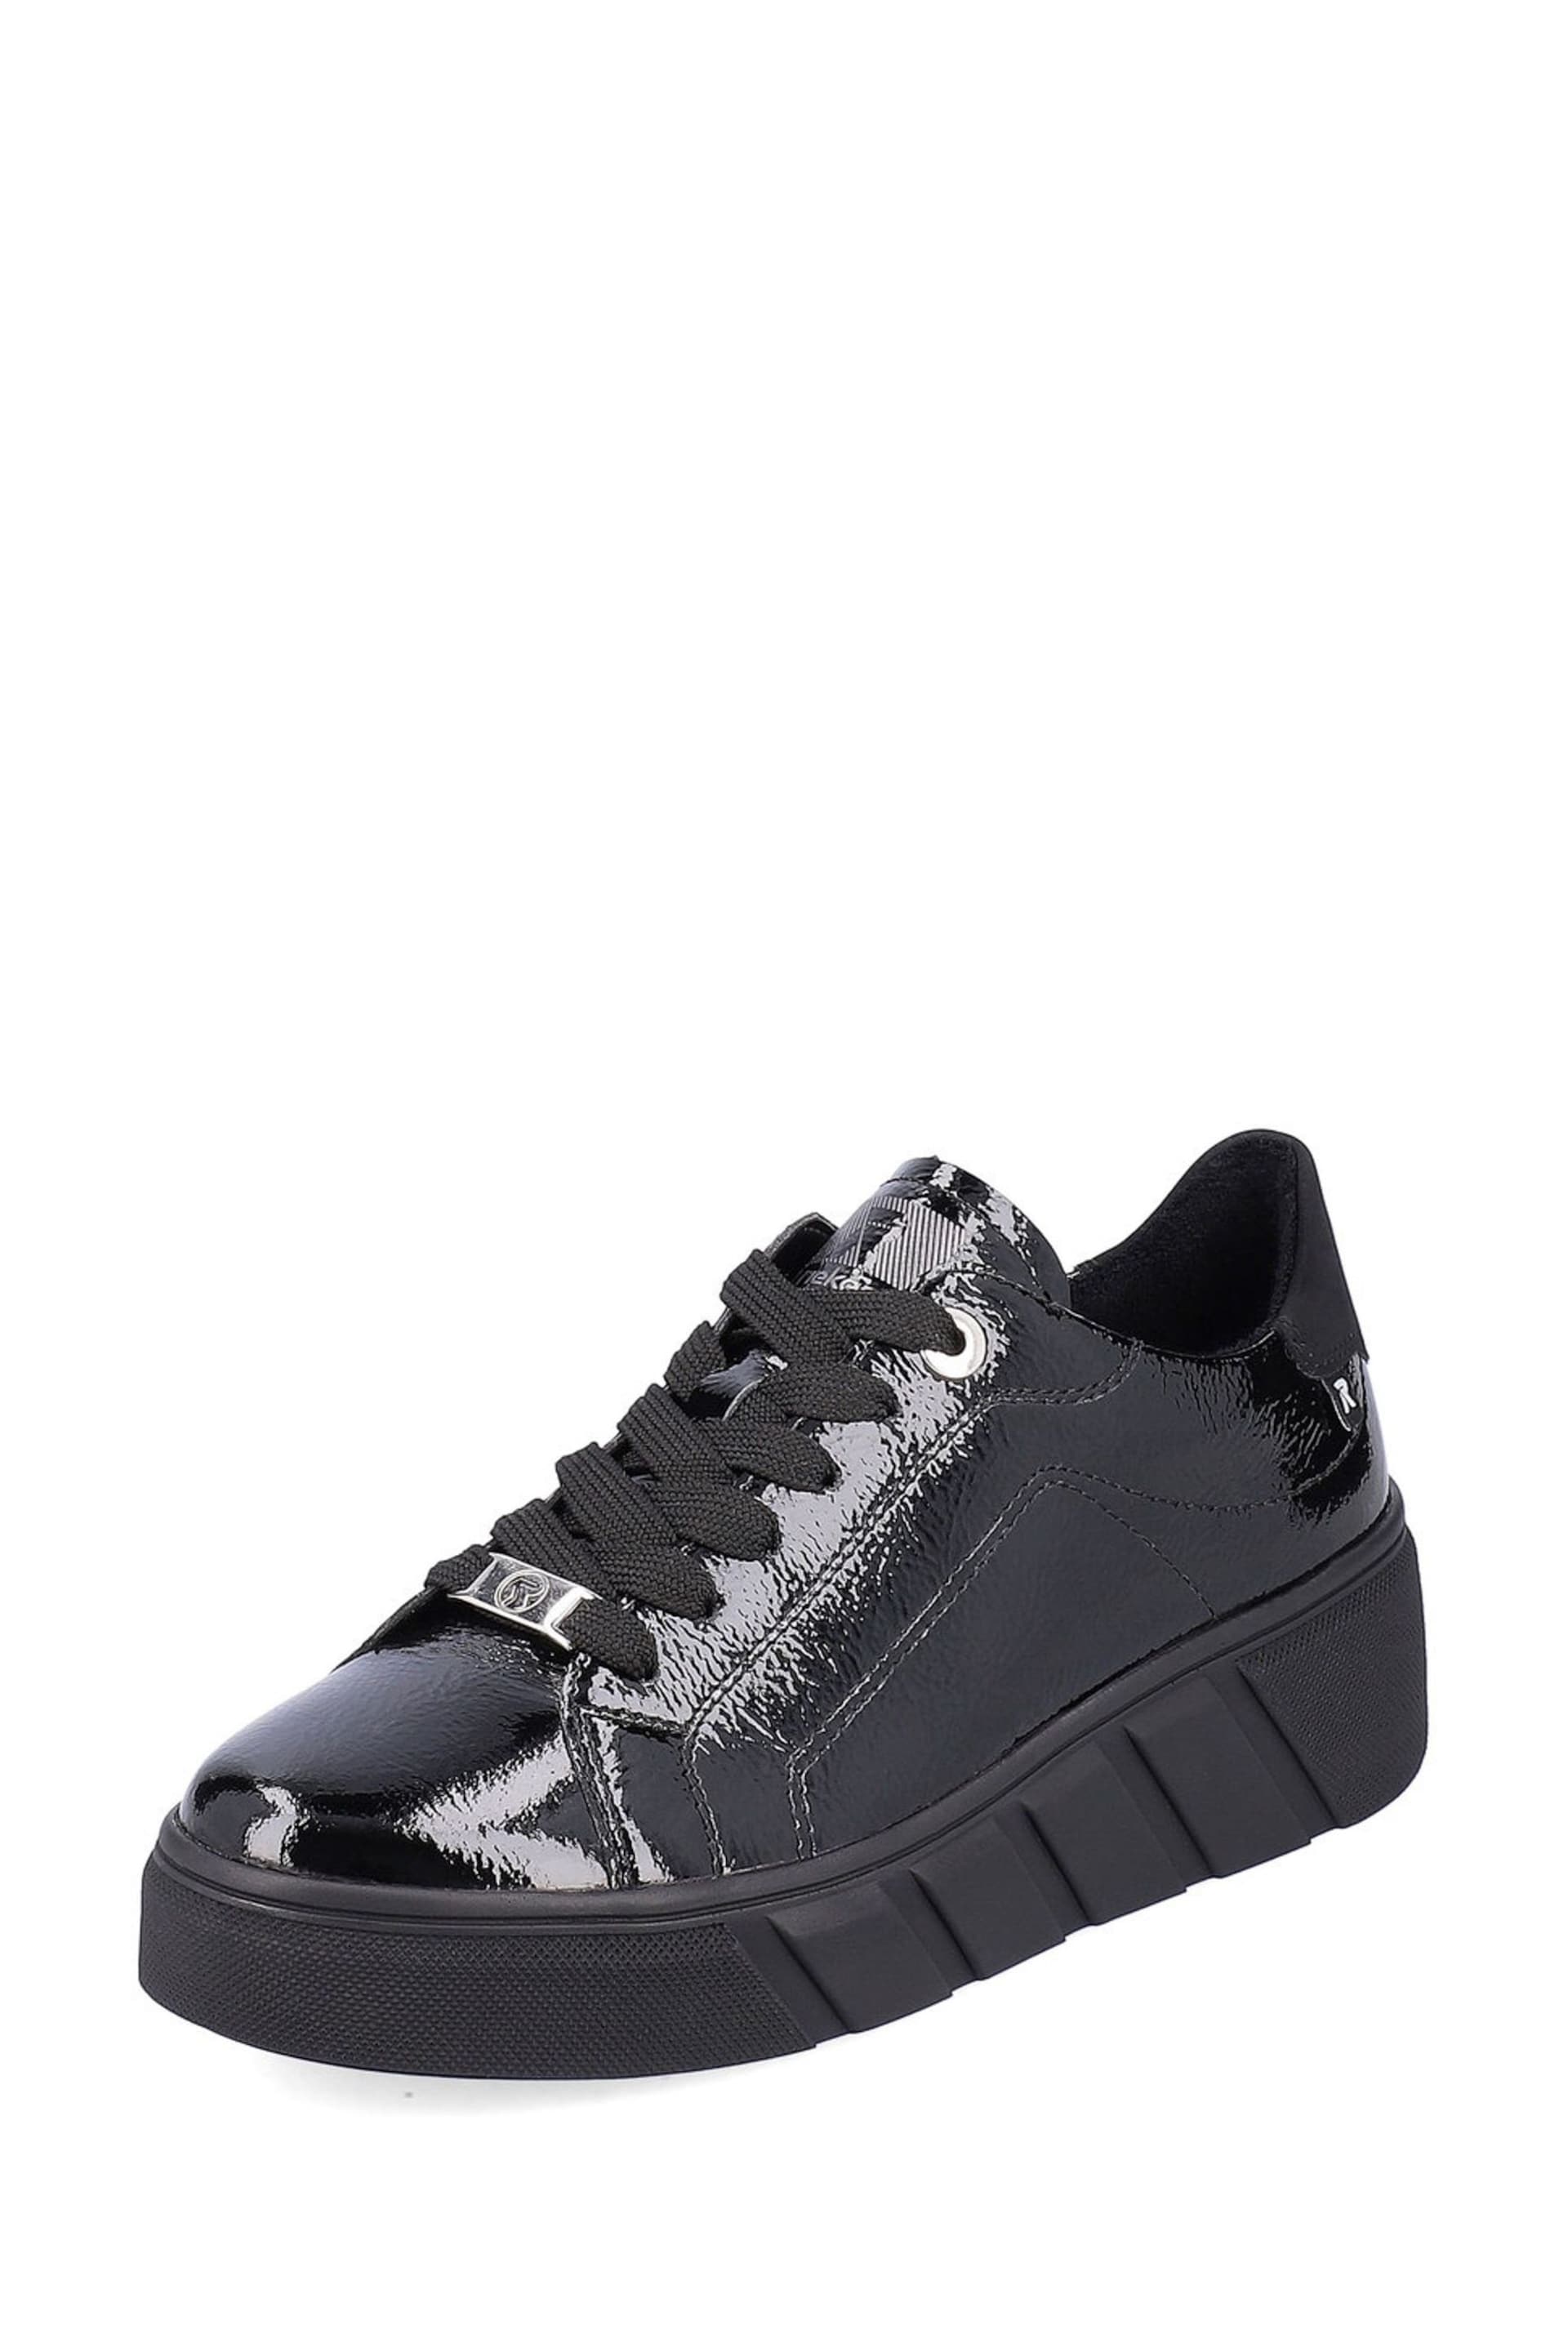 Rieker Womens Evolution Lace-Up Black Trainers - Image 3 of 11